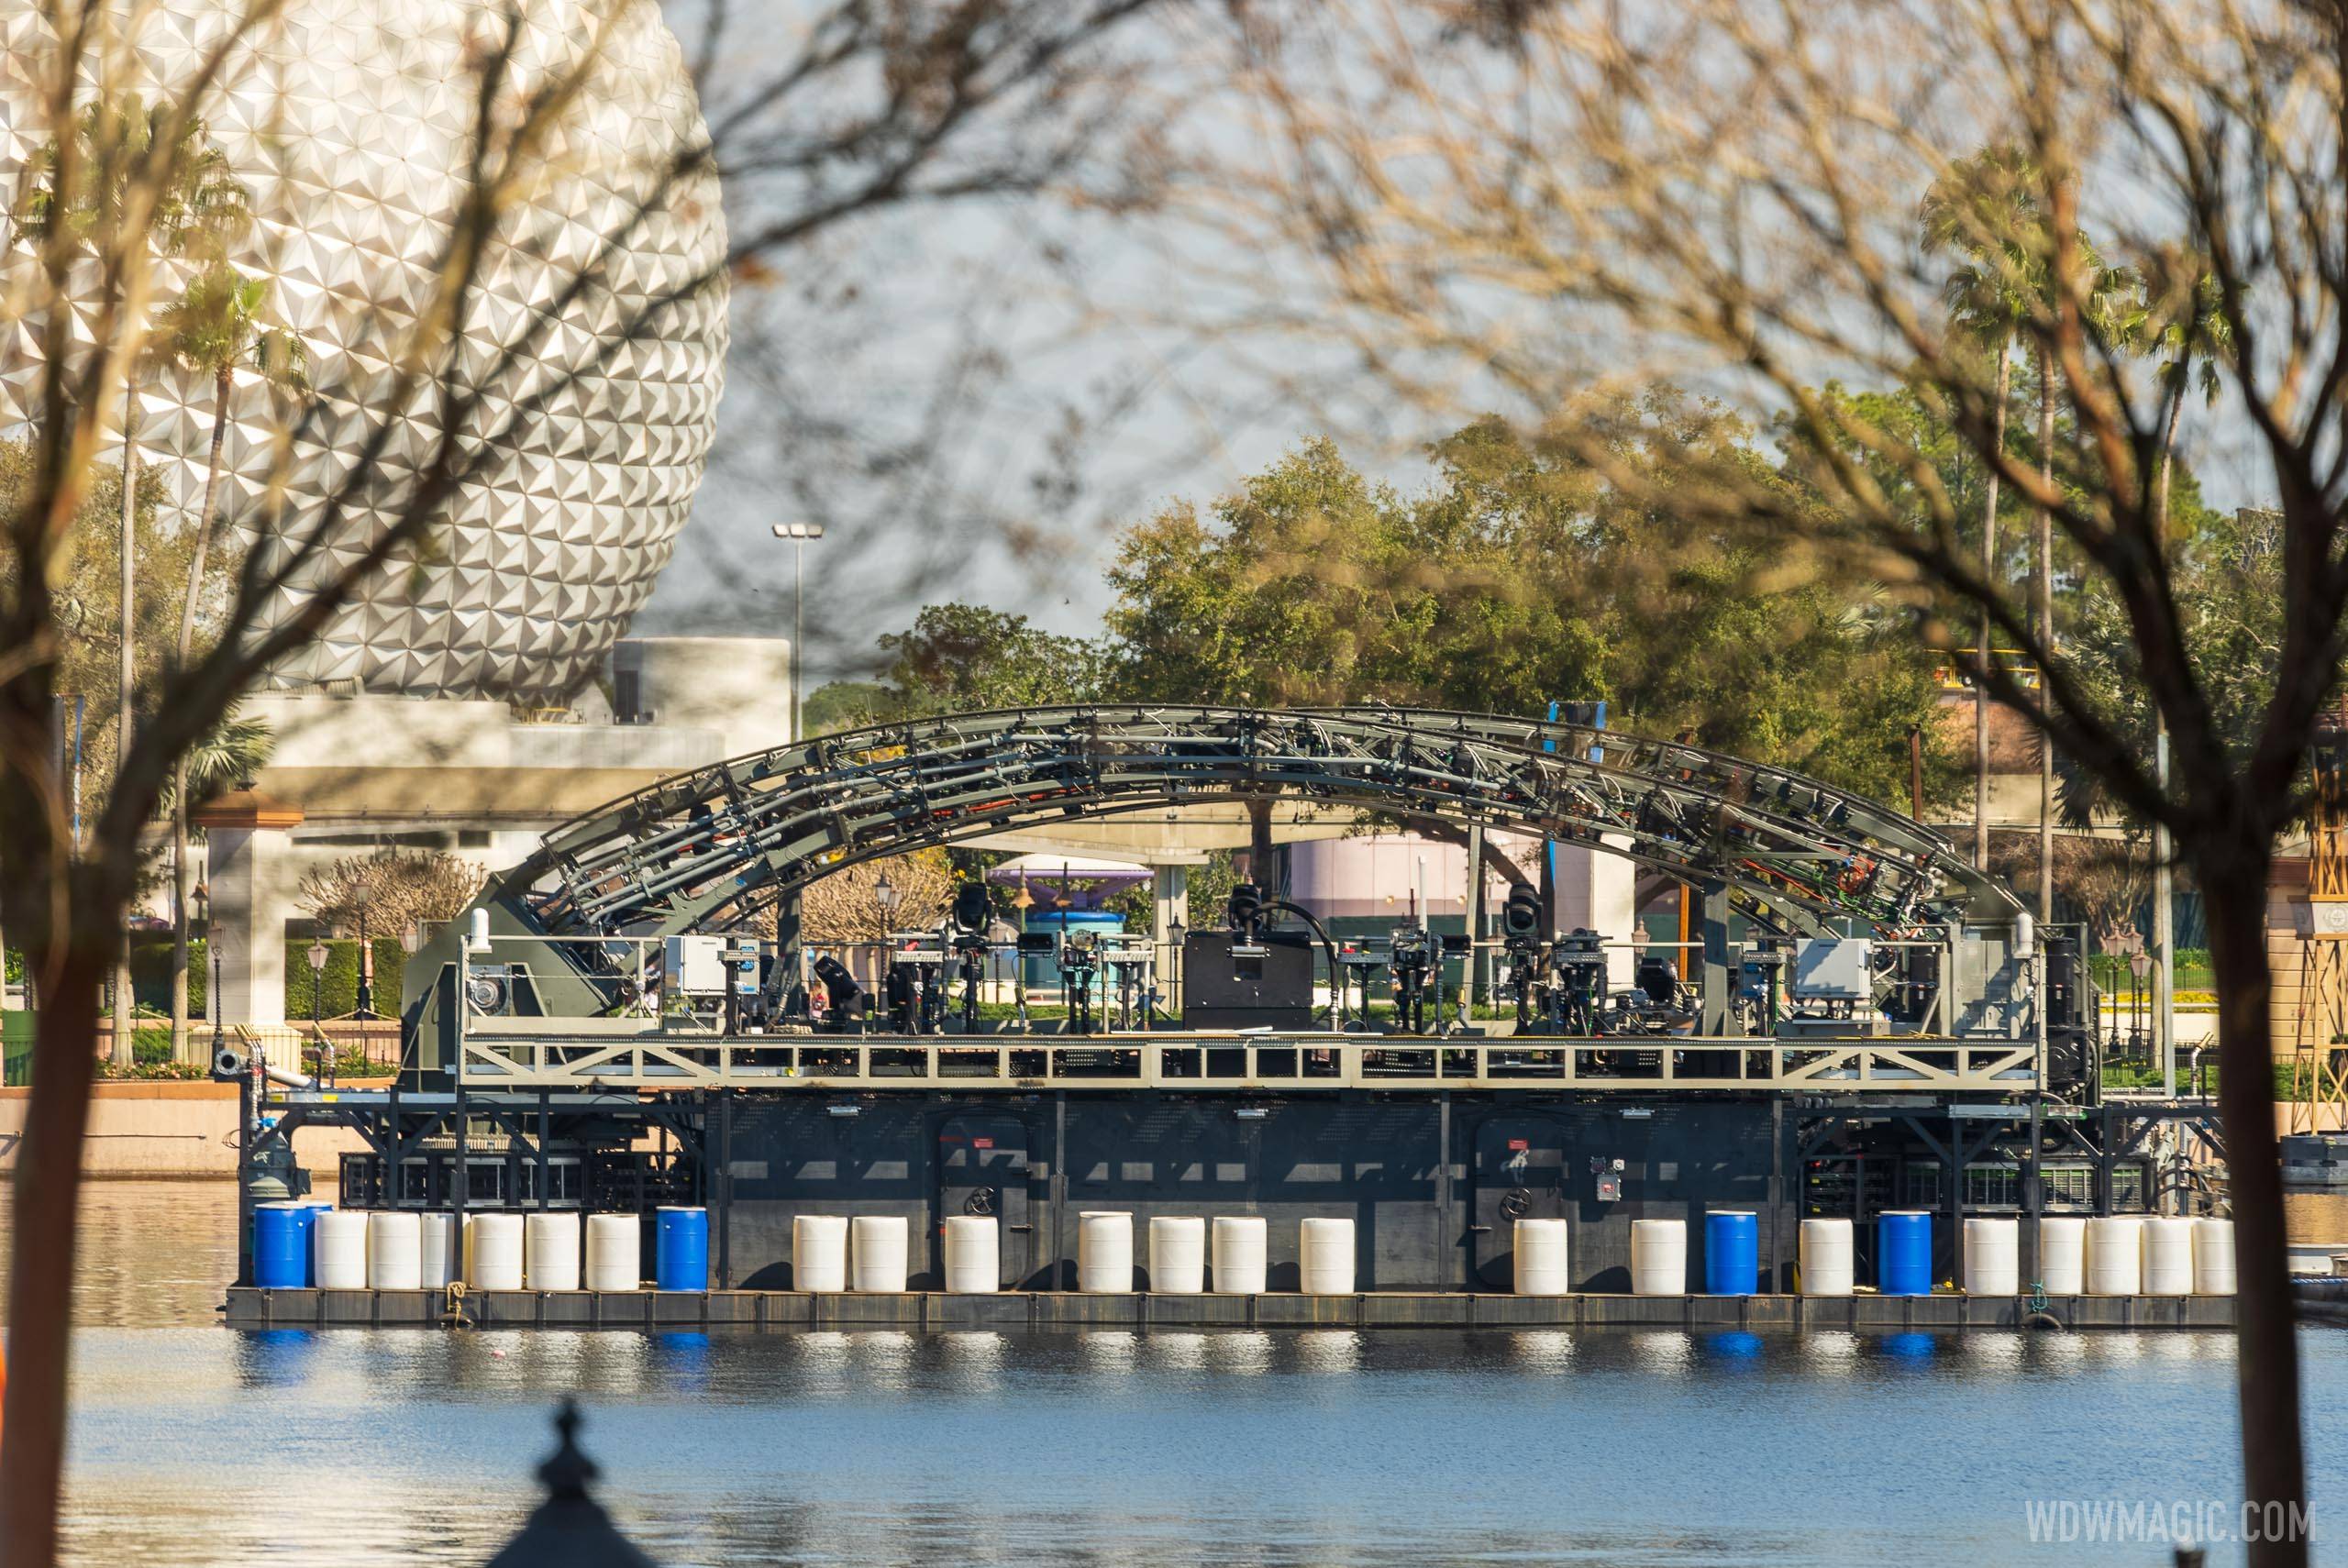 PHOTOS - Base of the main Harmonious central Stargate ring barge now in World Showcase Lagoon